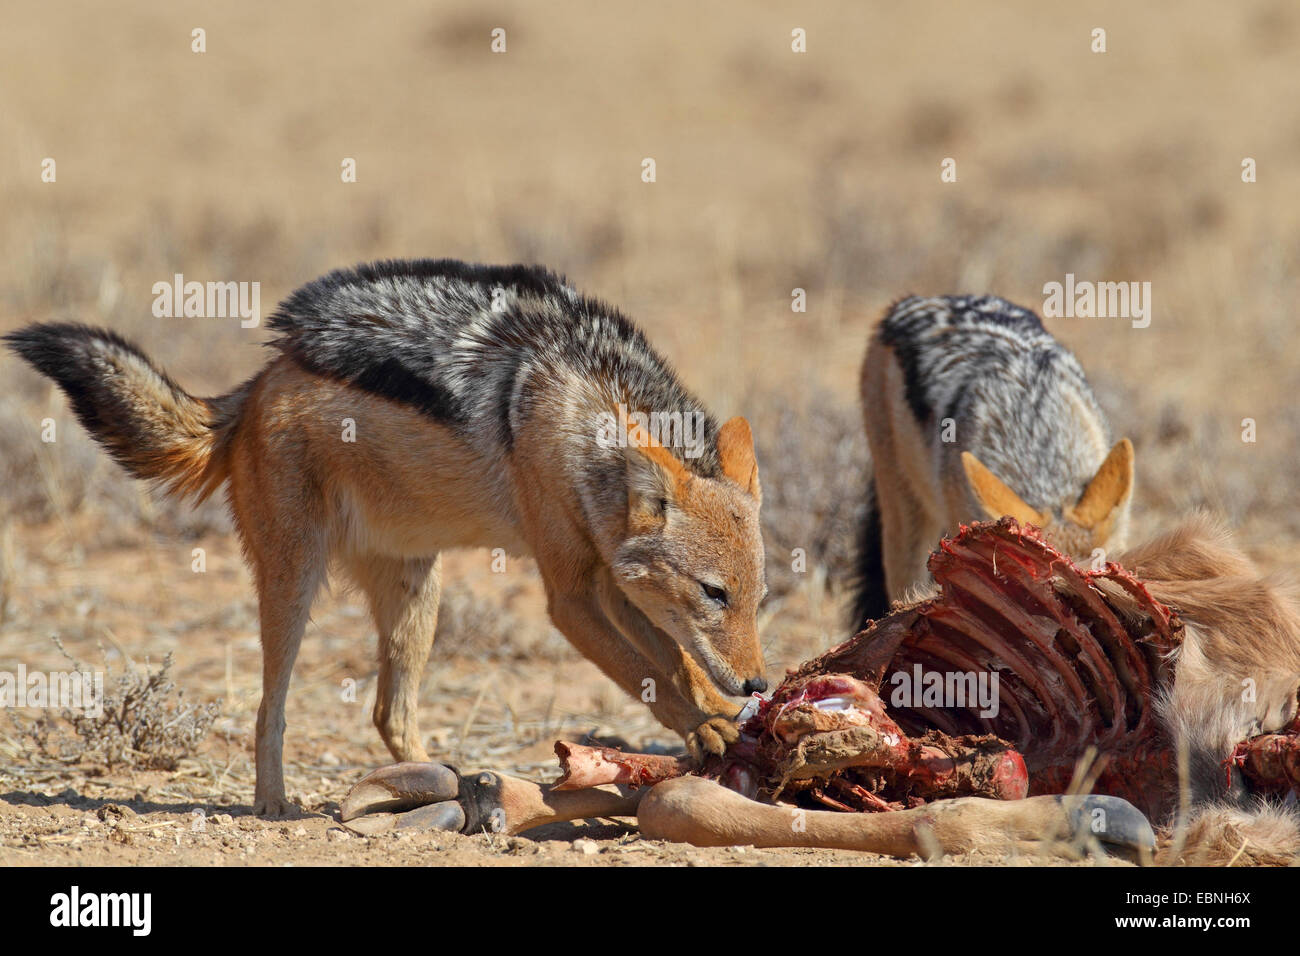 black-backed jackal (Canis mesomelas), two jackals eating at a dead wildebeest, South Africa, Kgalagadi Transfrontier National Park Stock Photo